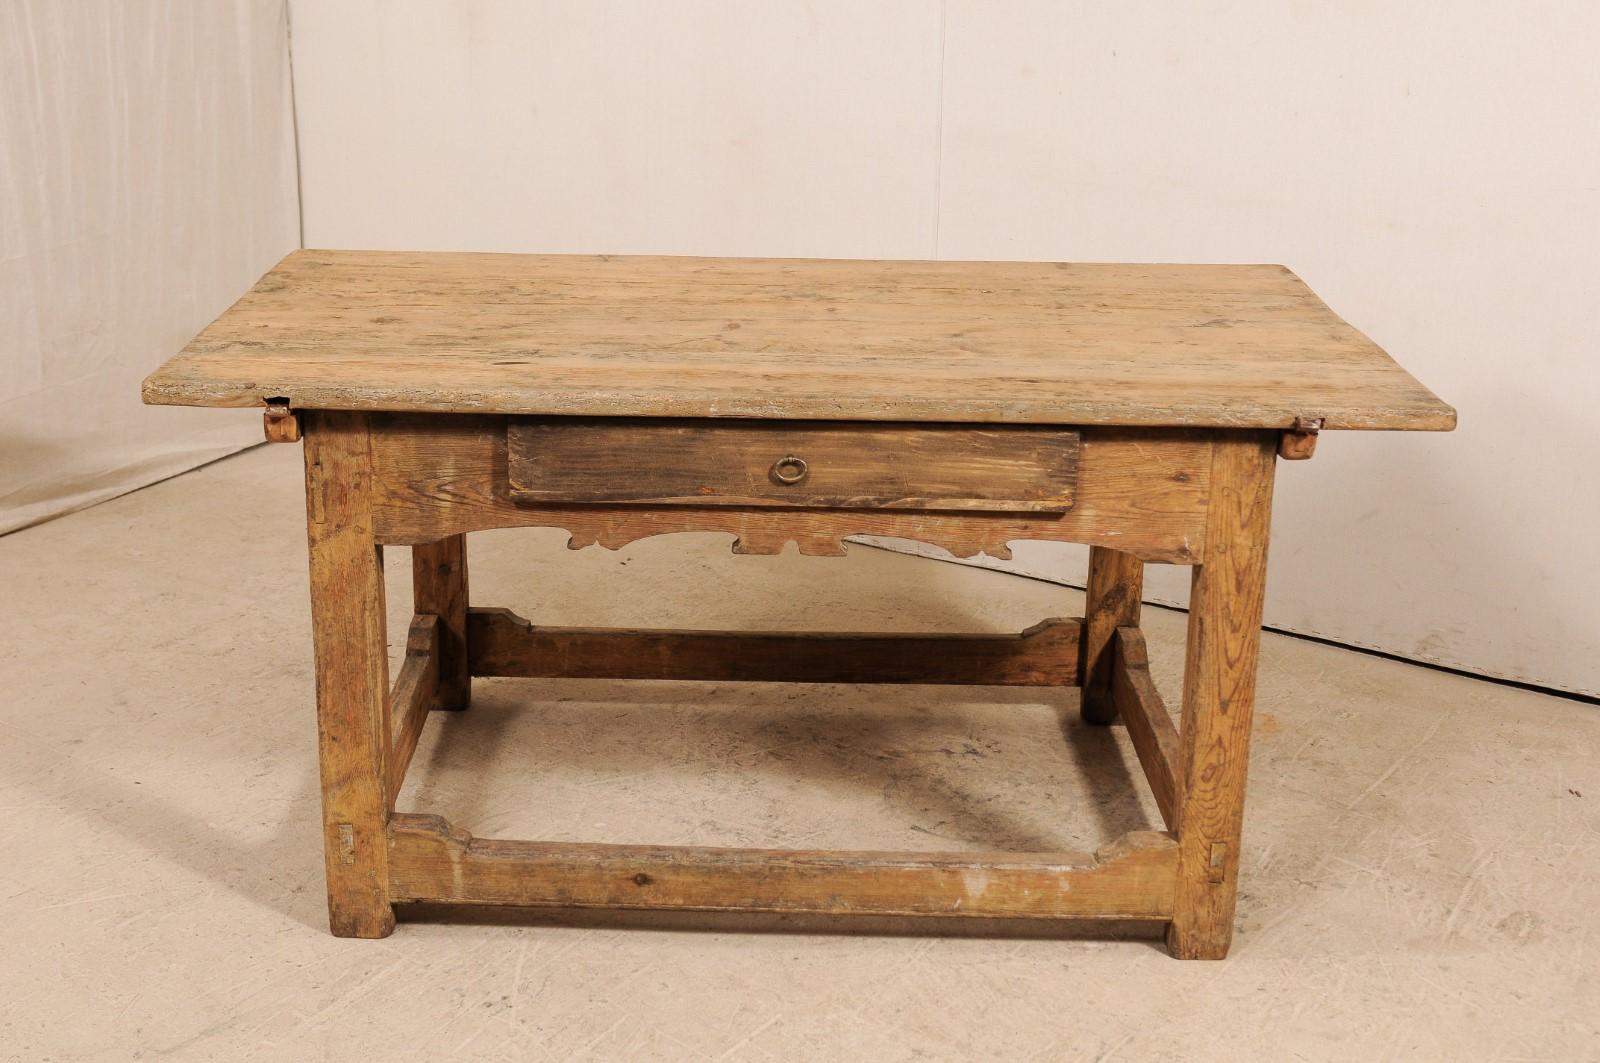 A Swedish desk table with sliding top from the early 19th century. This antique table from Sweden has an overhung, rectangular-shaped top, above a decoratively carved apron which houses a single drawer. The table is raised on four thickly squared